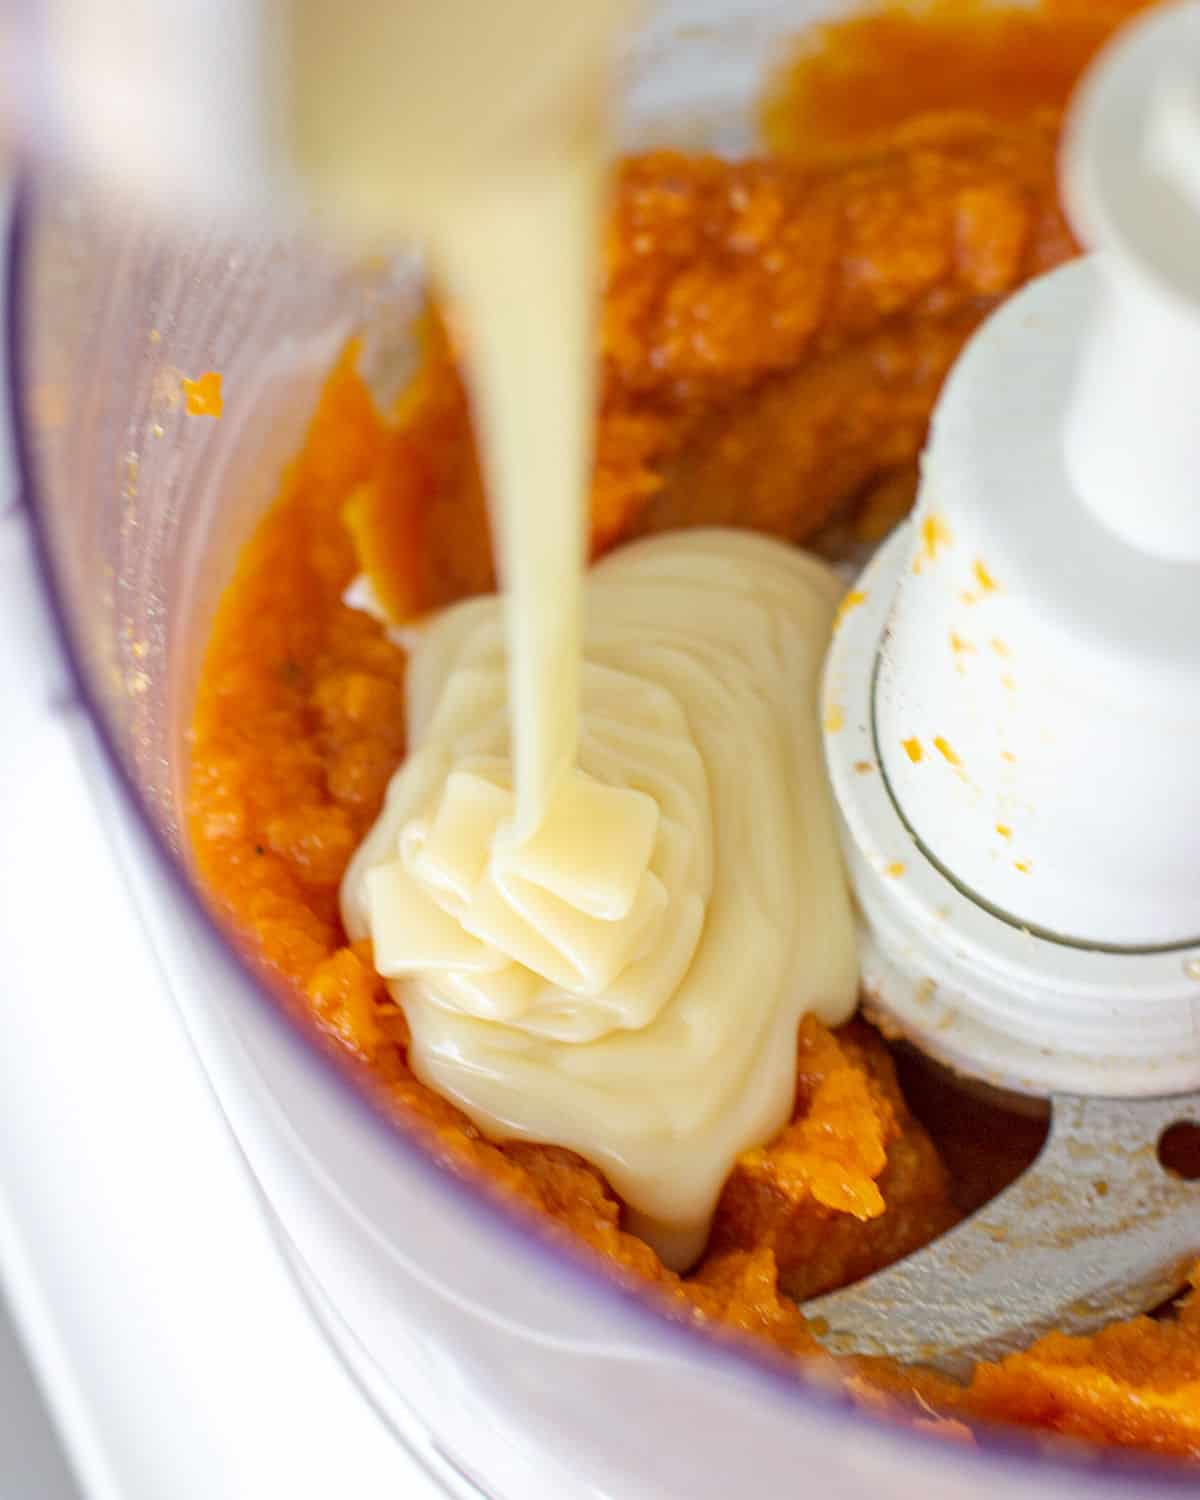 Condensed milk being poured into the jar of a food processor with orange sweet potato puree.